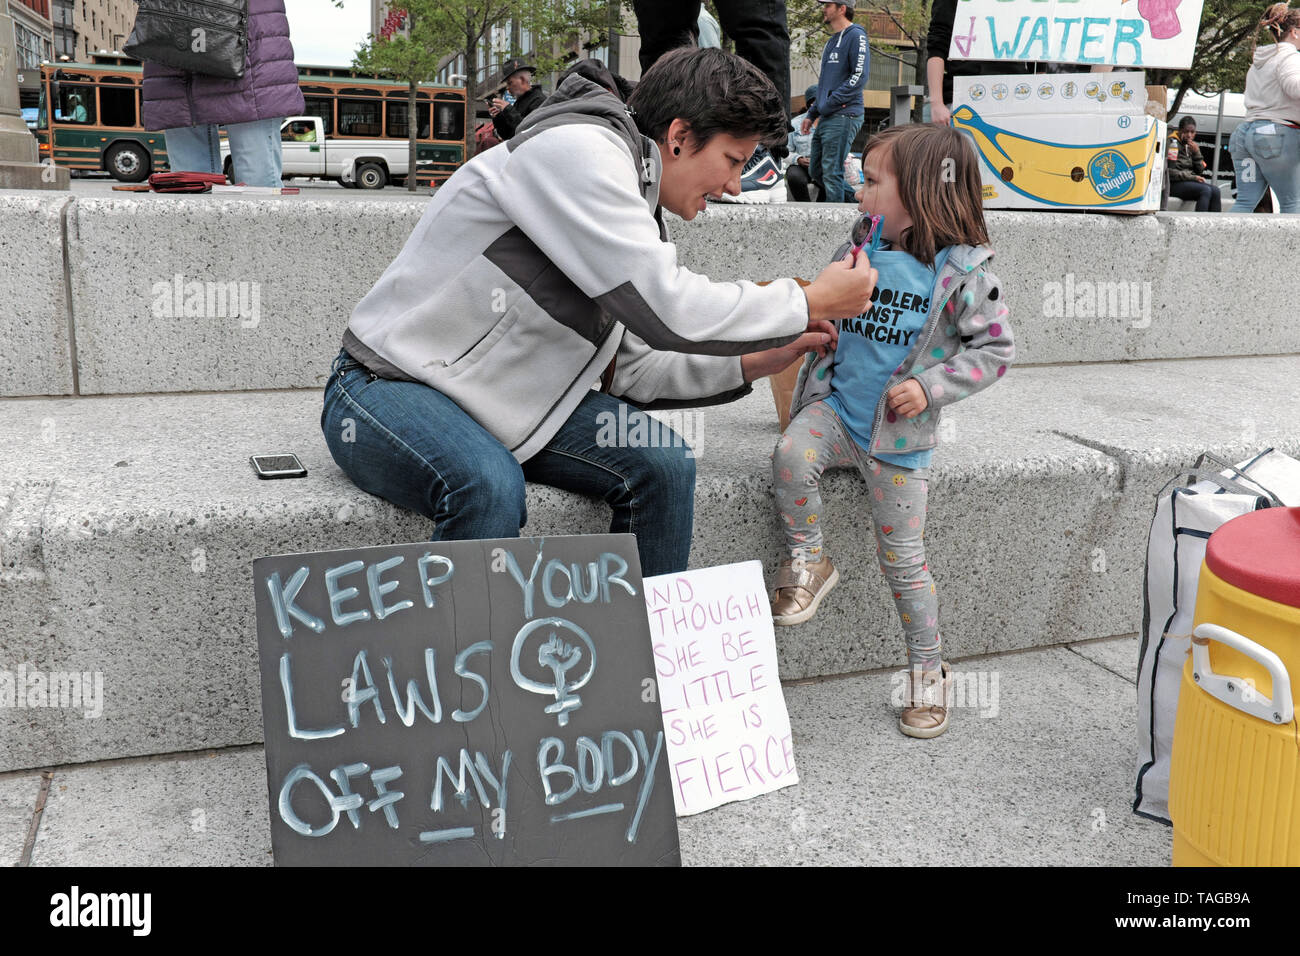 Woman and young girl take a rest in Cleveland's Public Square at the May 2019 Pro-Choice Rally against changes to Ohio abortion laws. Stock Photo